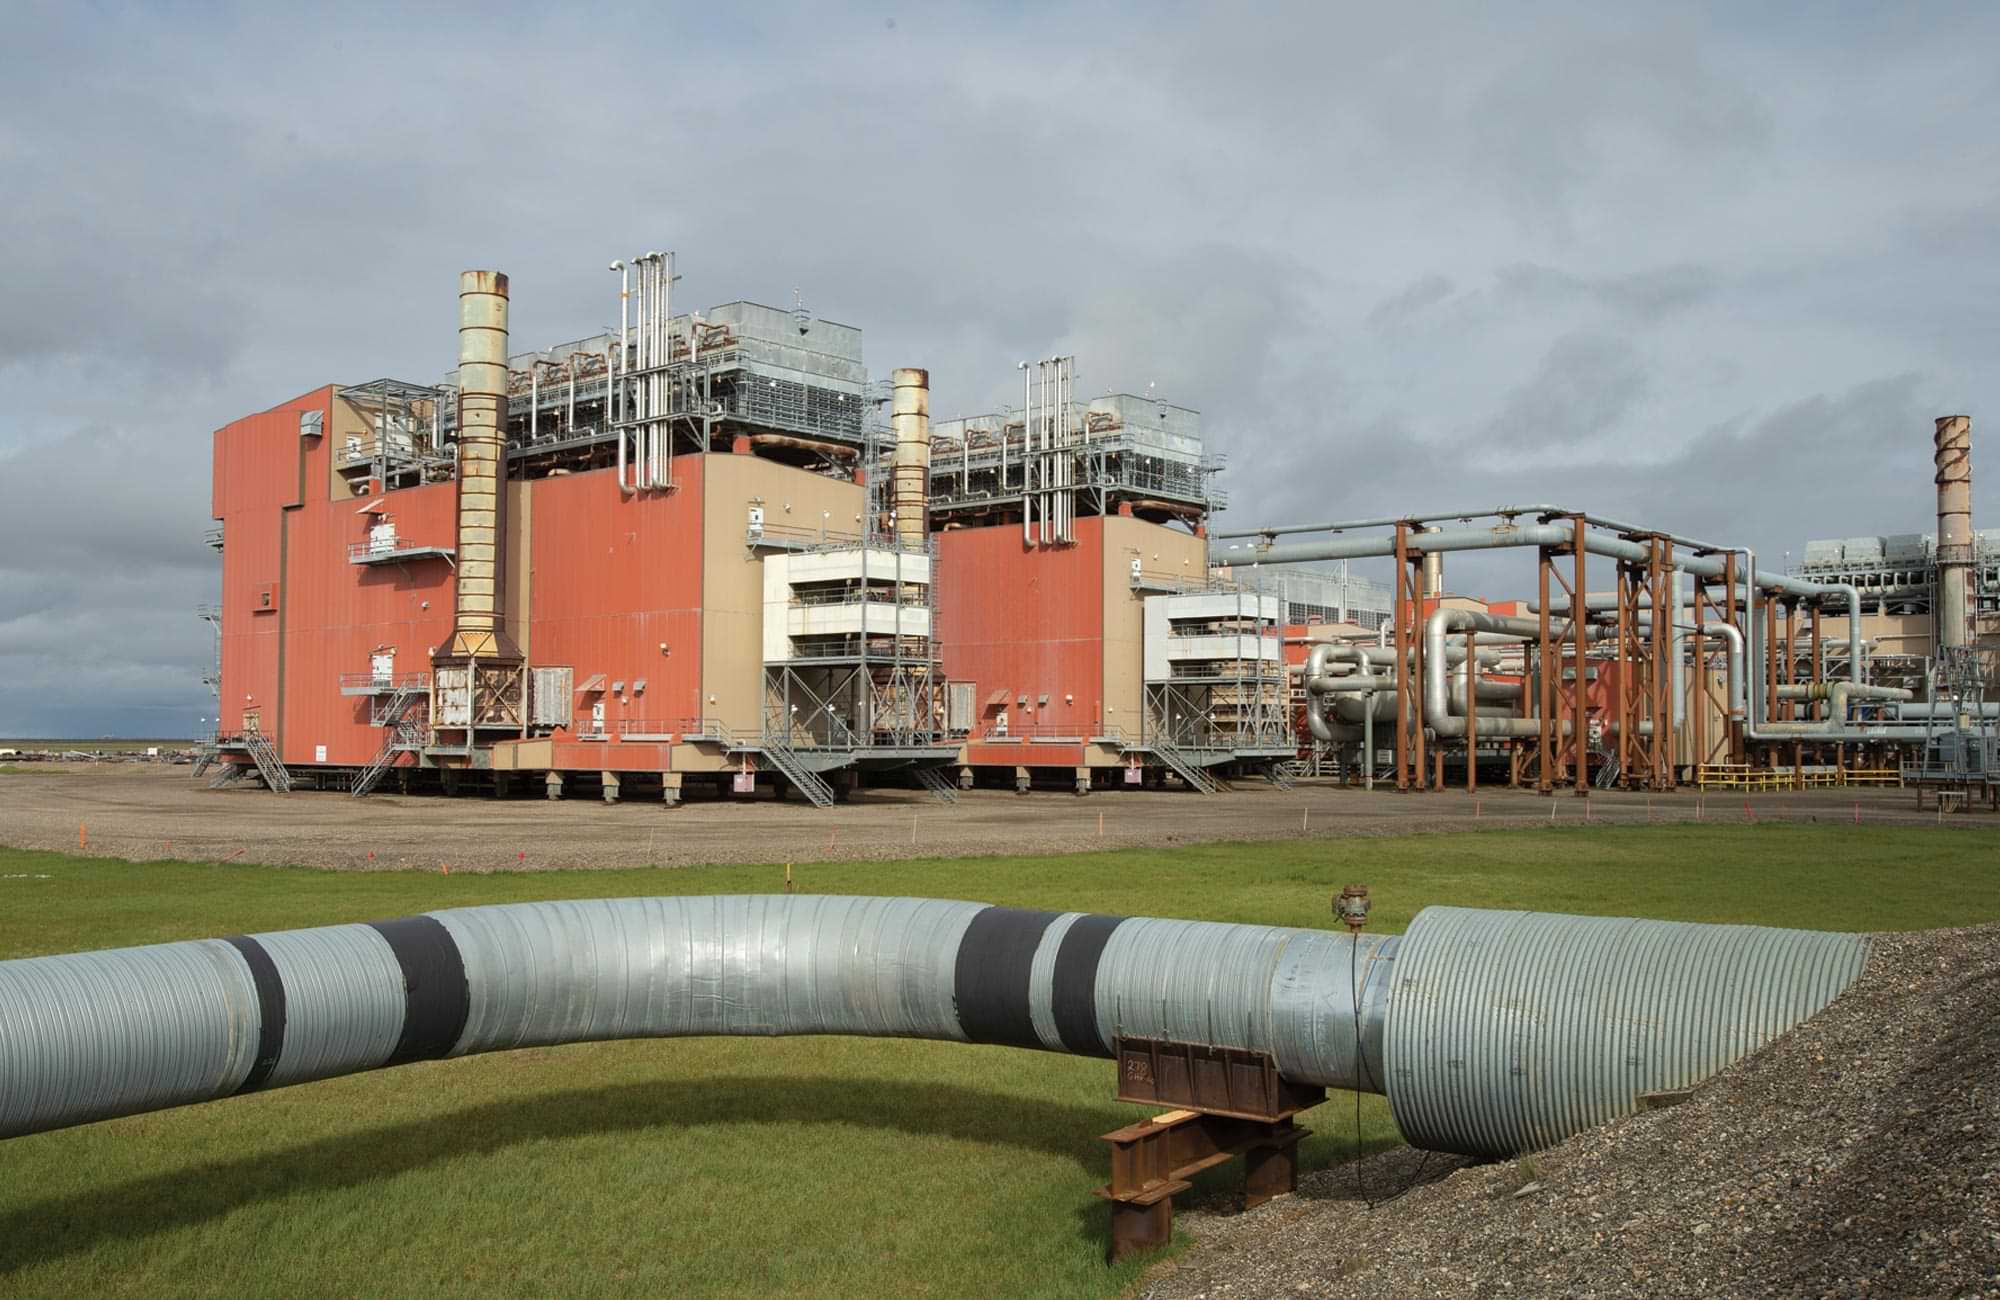 ground view of the Central Gas Facility at Prudhoe Bay